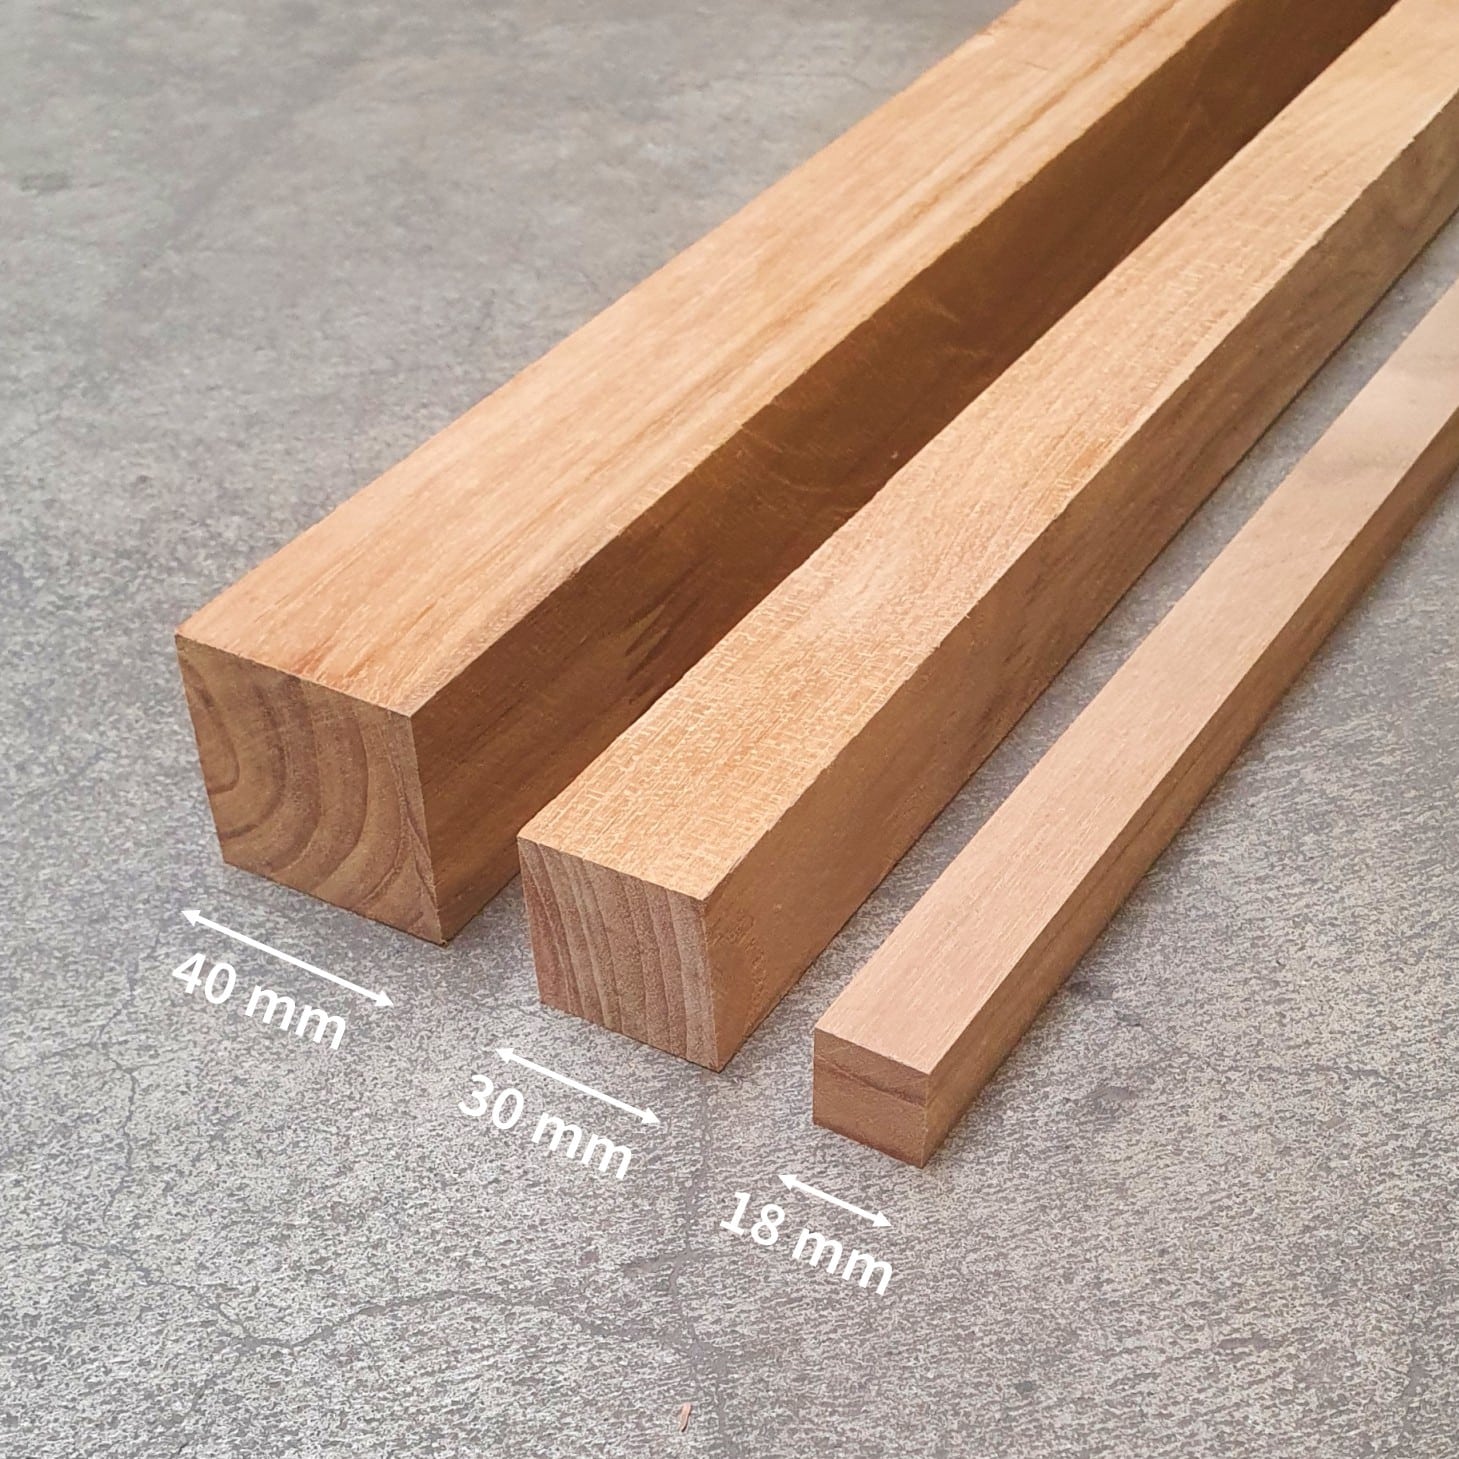 Teak wood 8-10 Feet Wooden Strips, For Furniture, Rustic at Rs 150